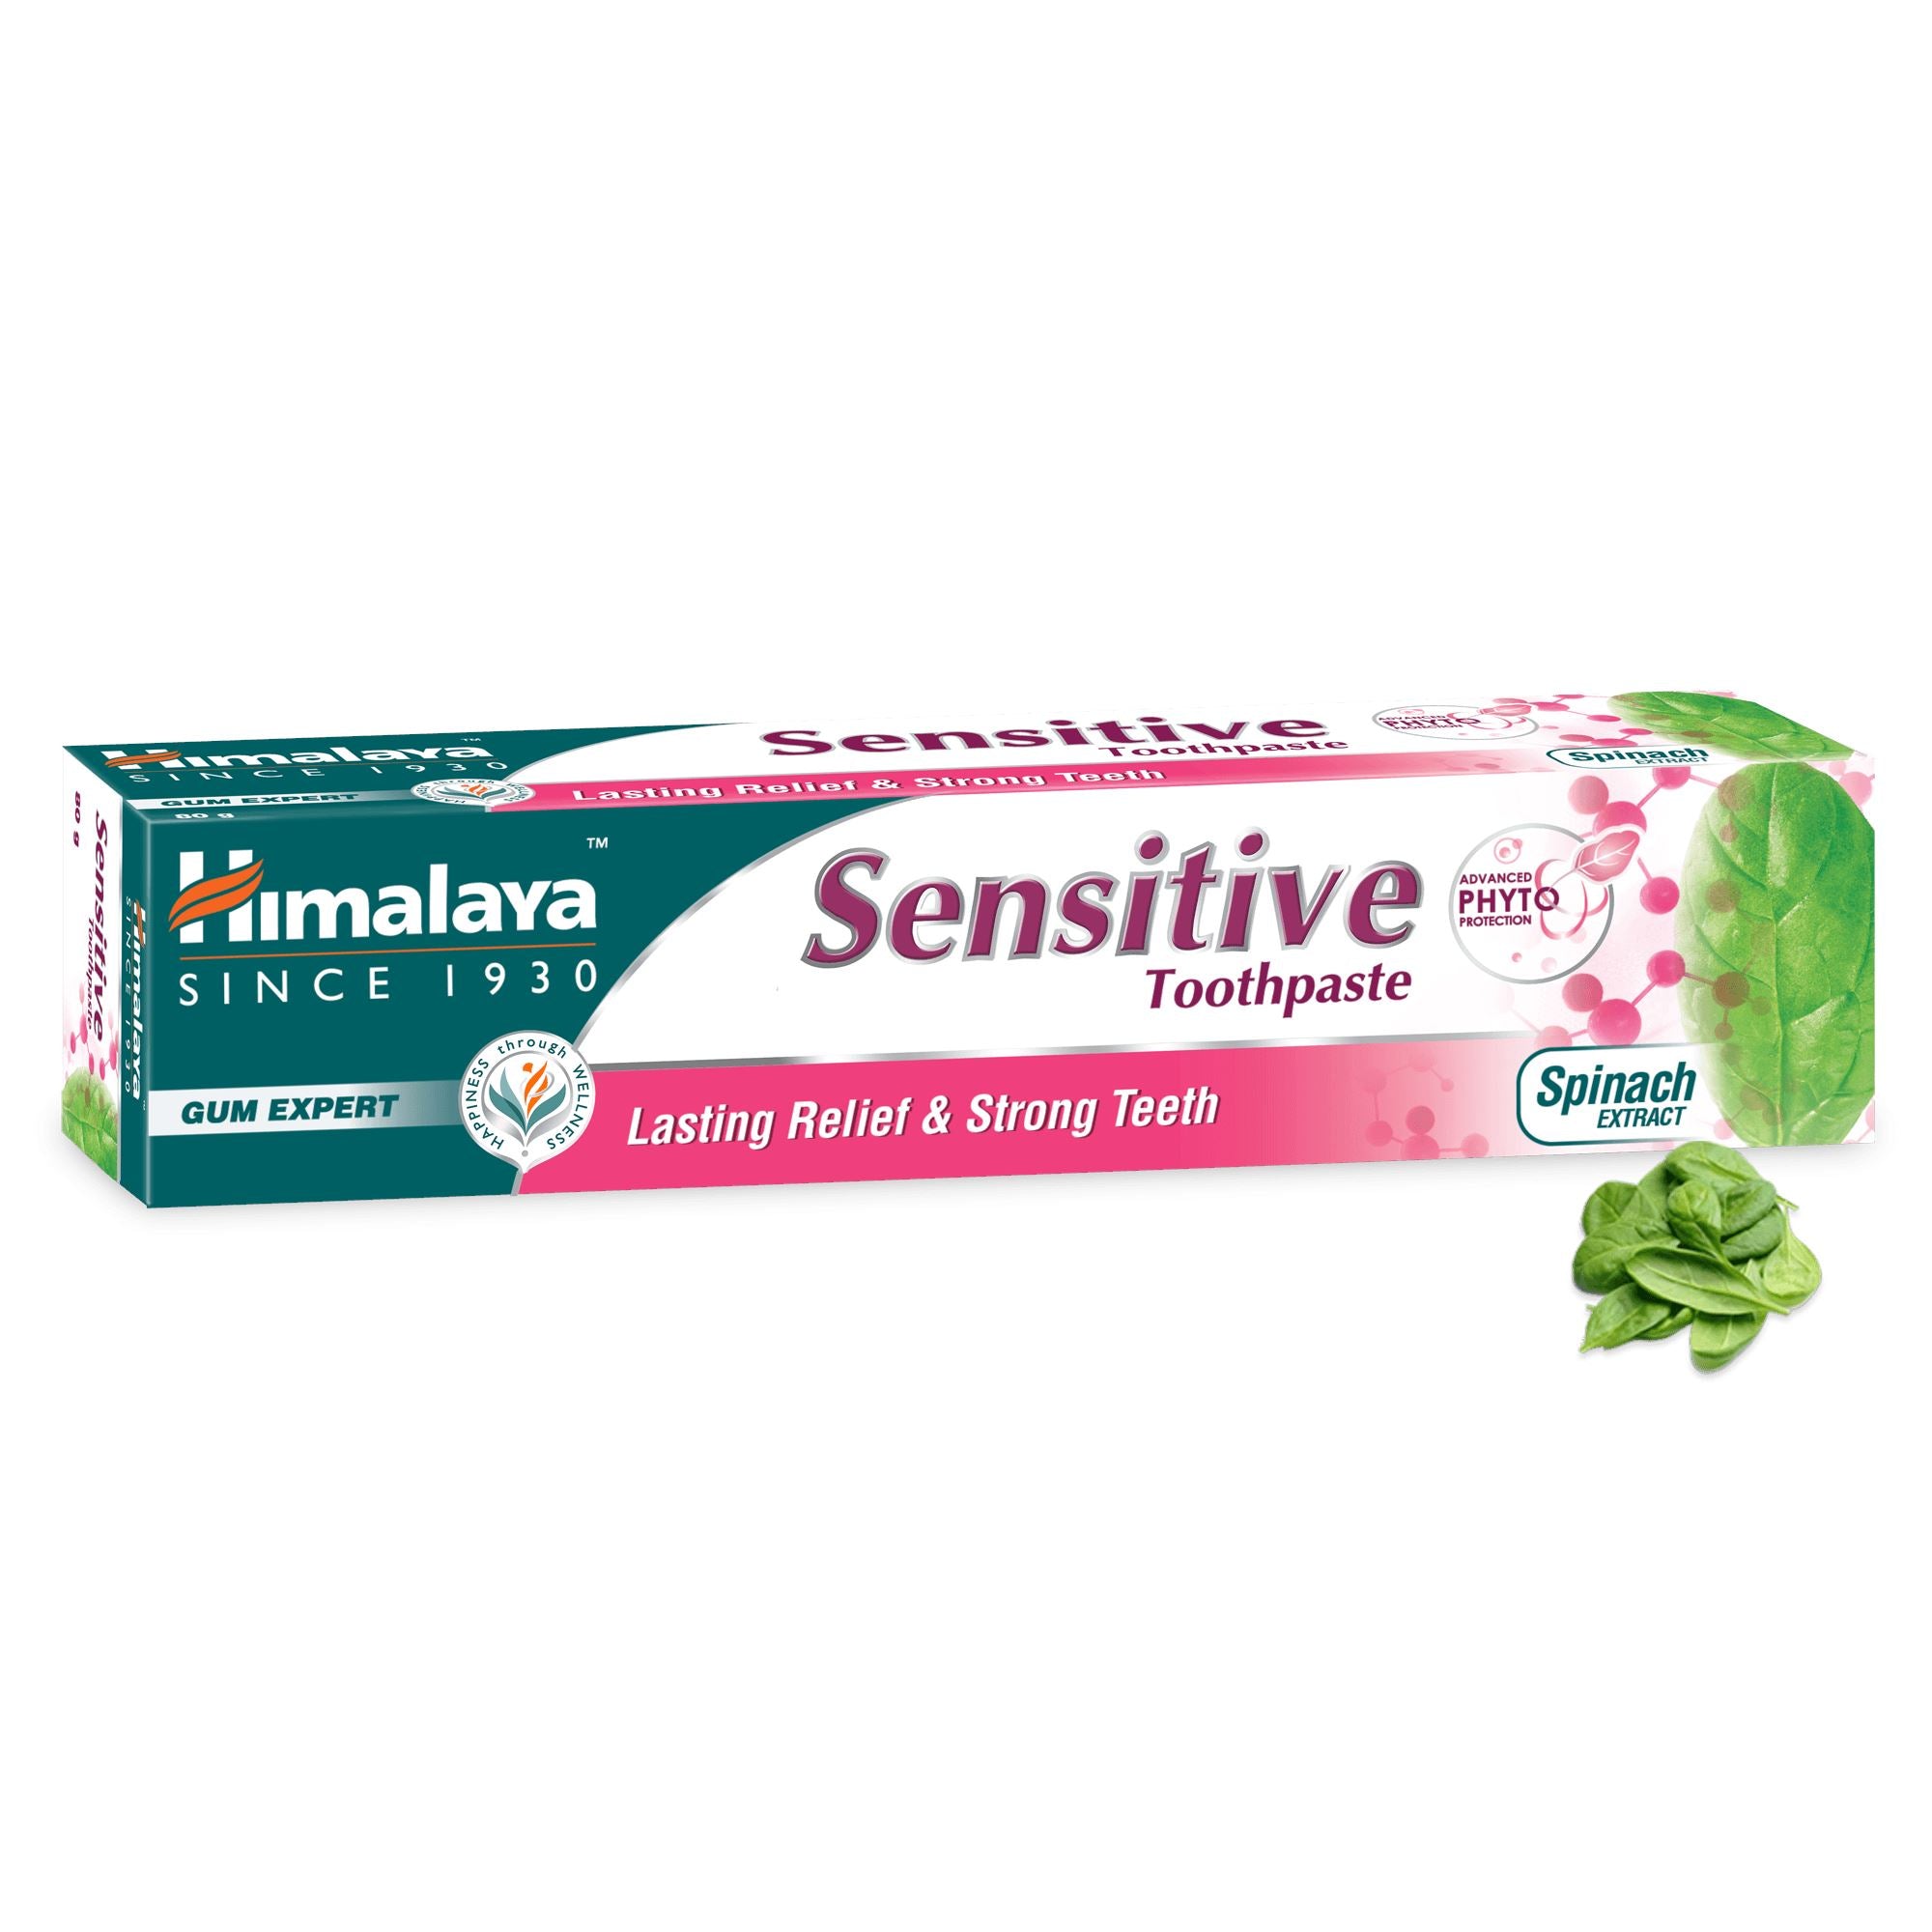 Himalaya Sensitive Toothpaste - Rapid and lasting relief from sensitivity